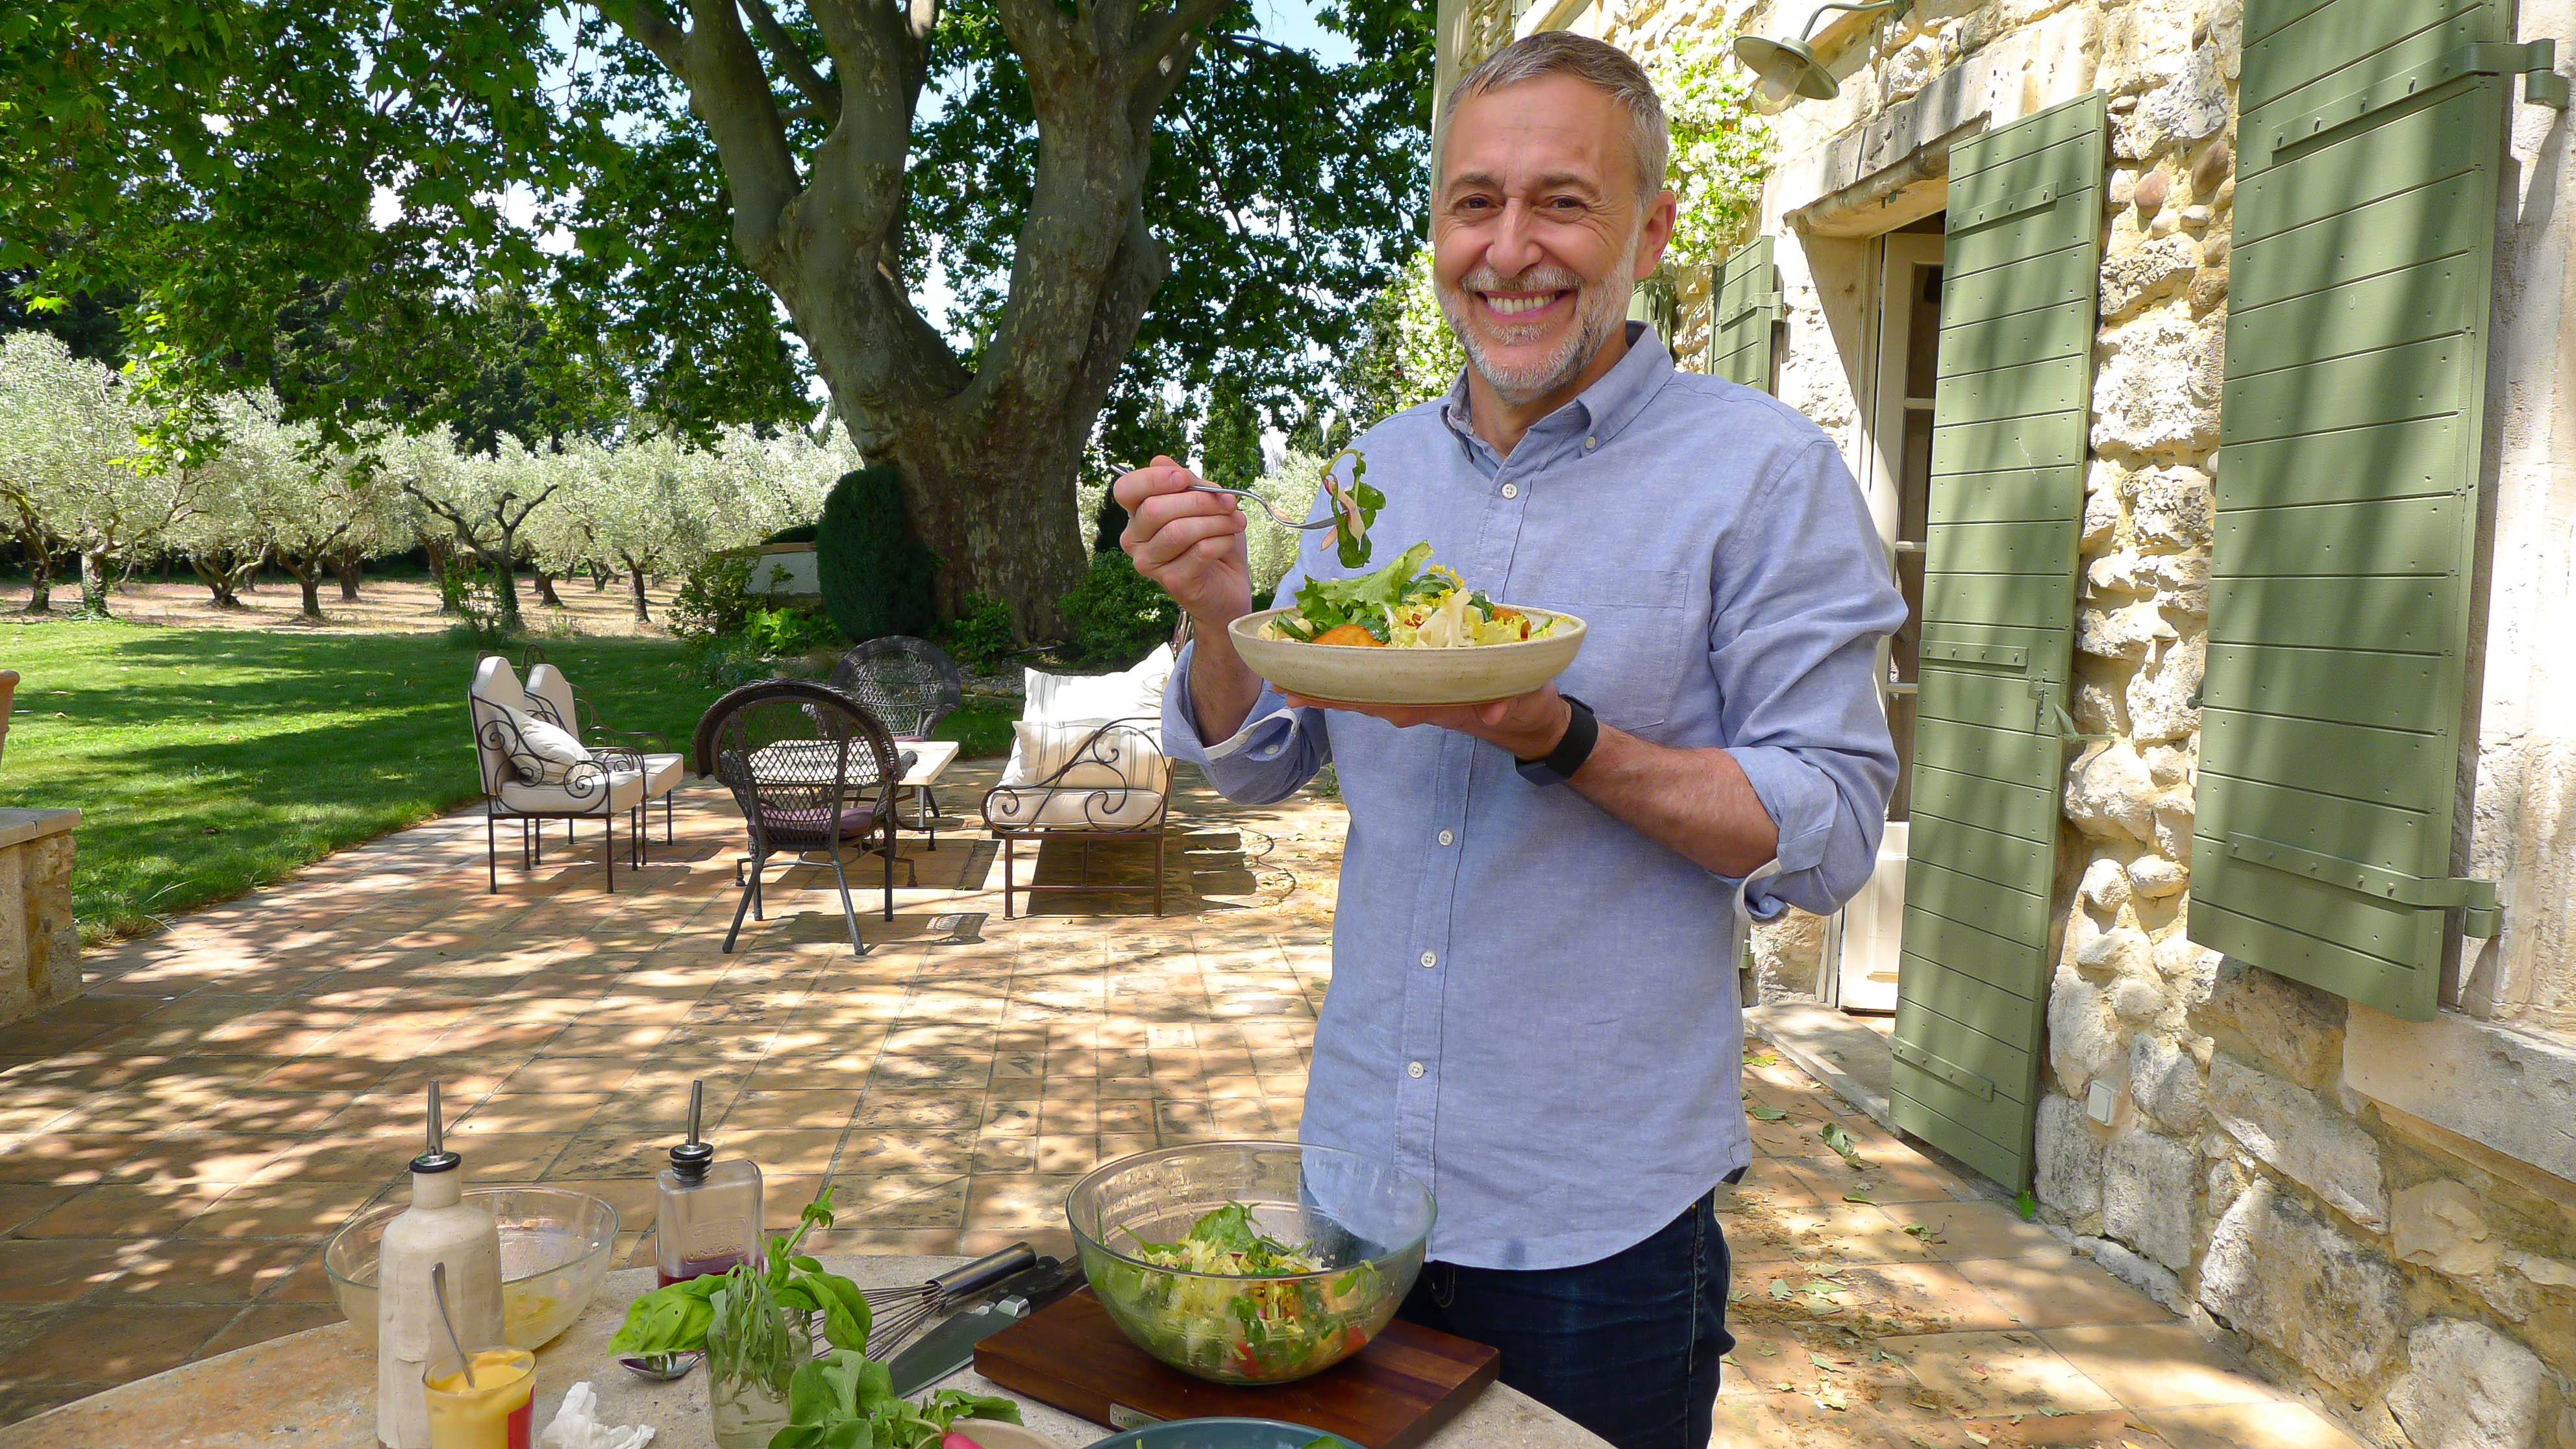 Decorated two-star Michelin chef Michel Roux Jr takes viewers on a culinary journey of the Provence region